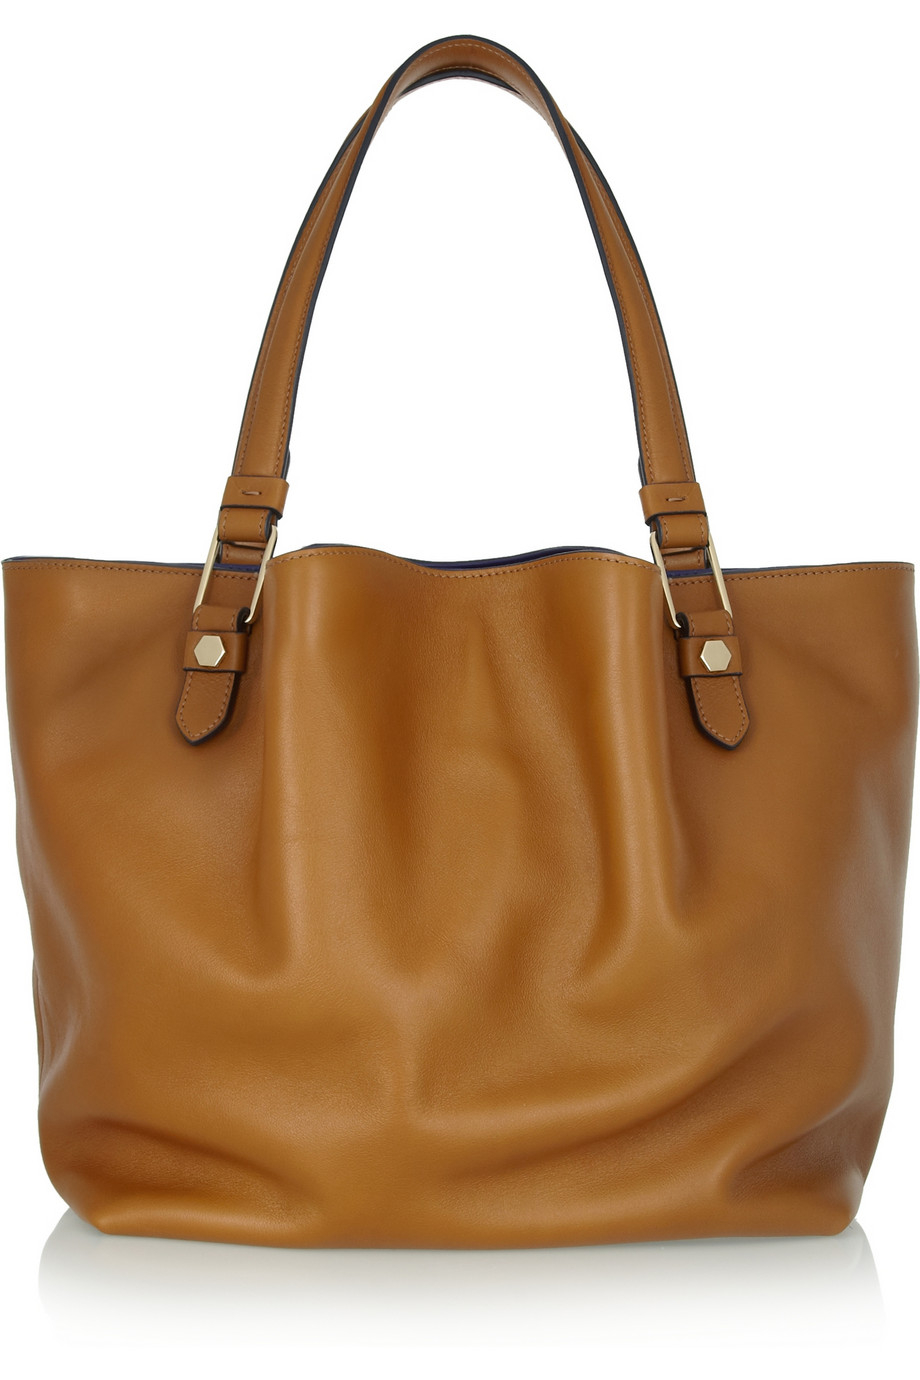 Lyst - Tod's Flower Large Leather Tote in Brown